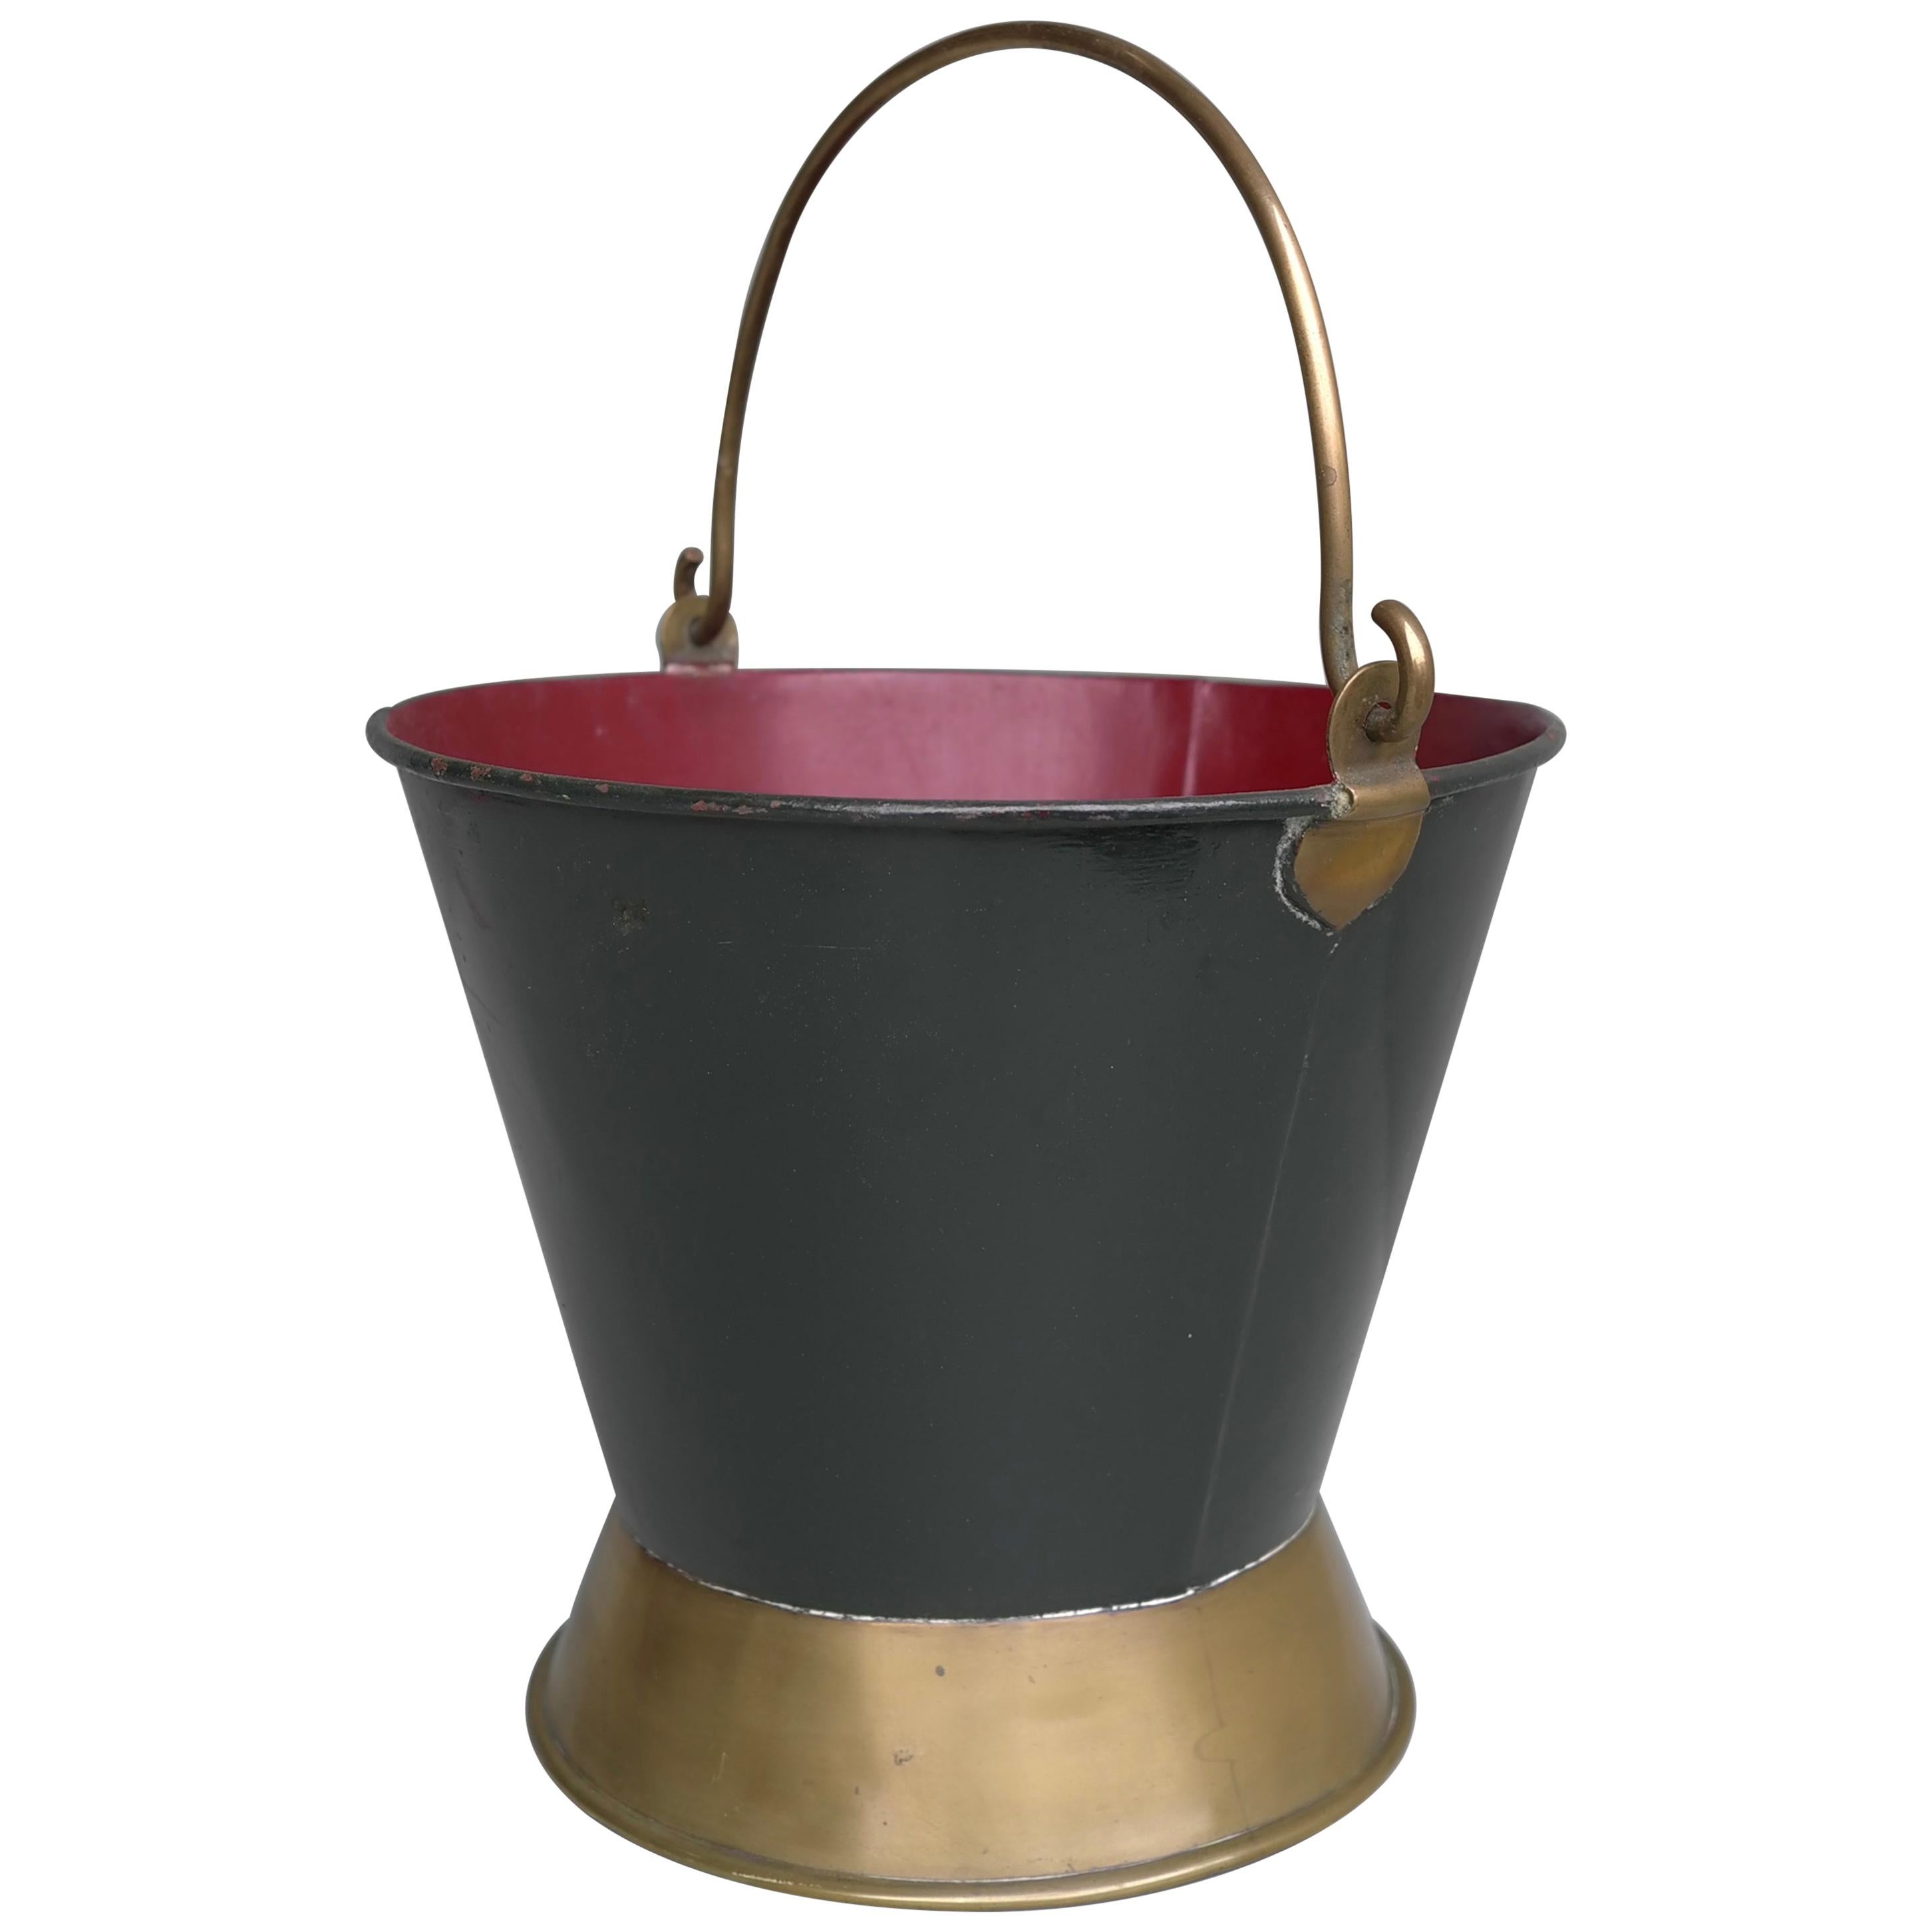 Decorative Red and Green Metal Firewood Bucket with Fine Brass Details